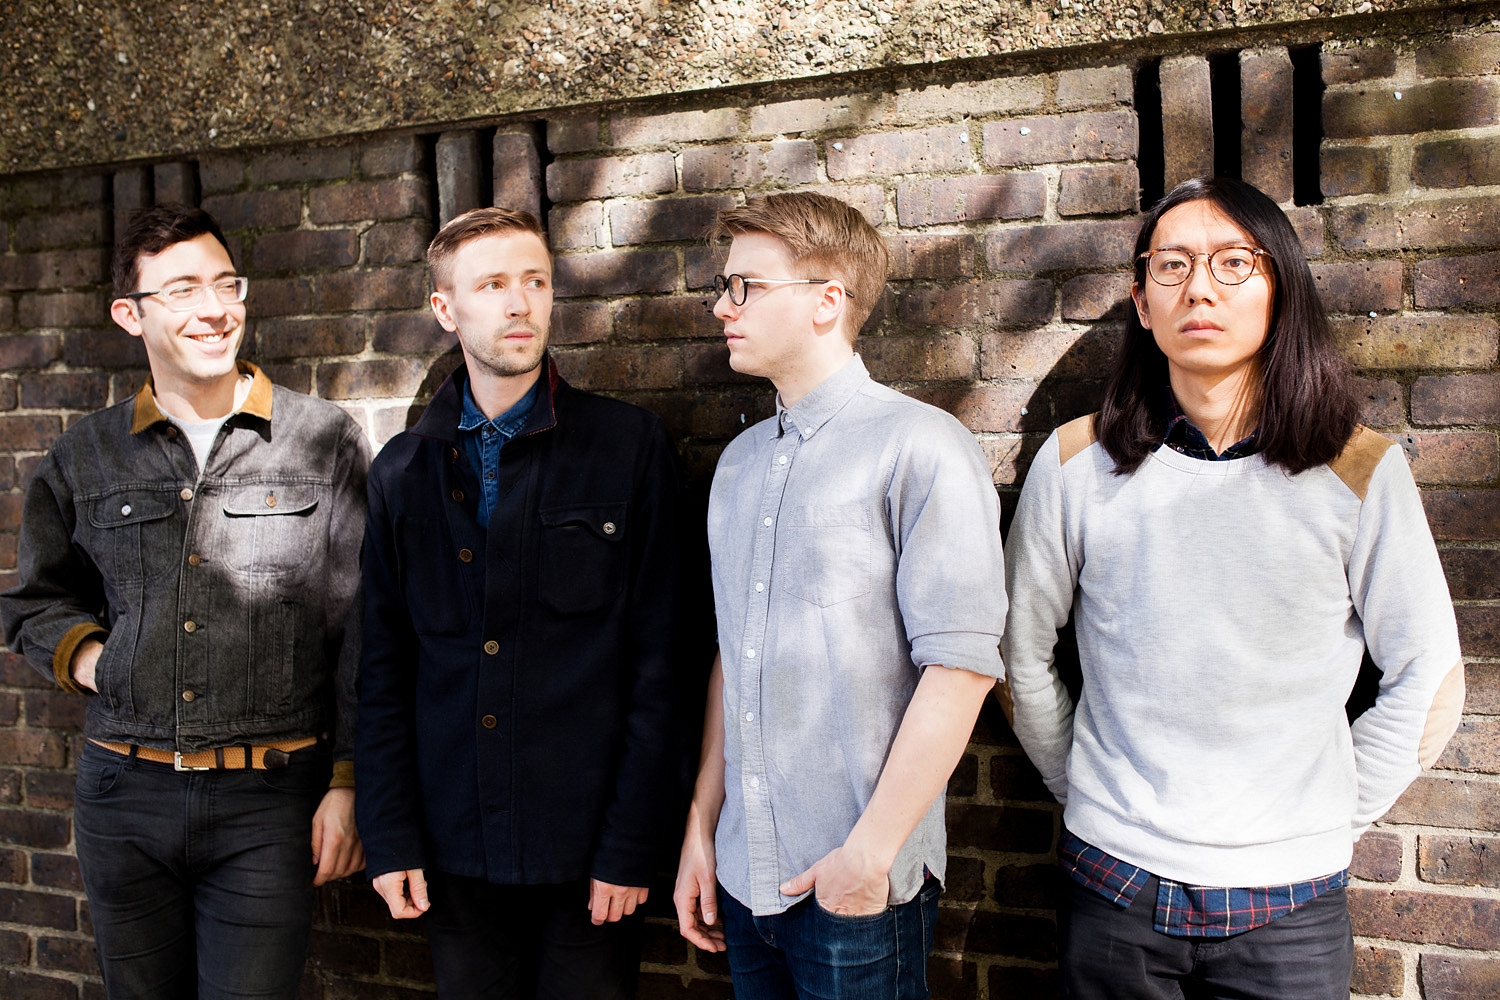 Teleman: "It’s about mixing business and pleasure."